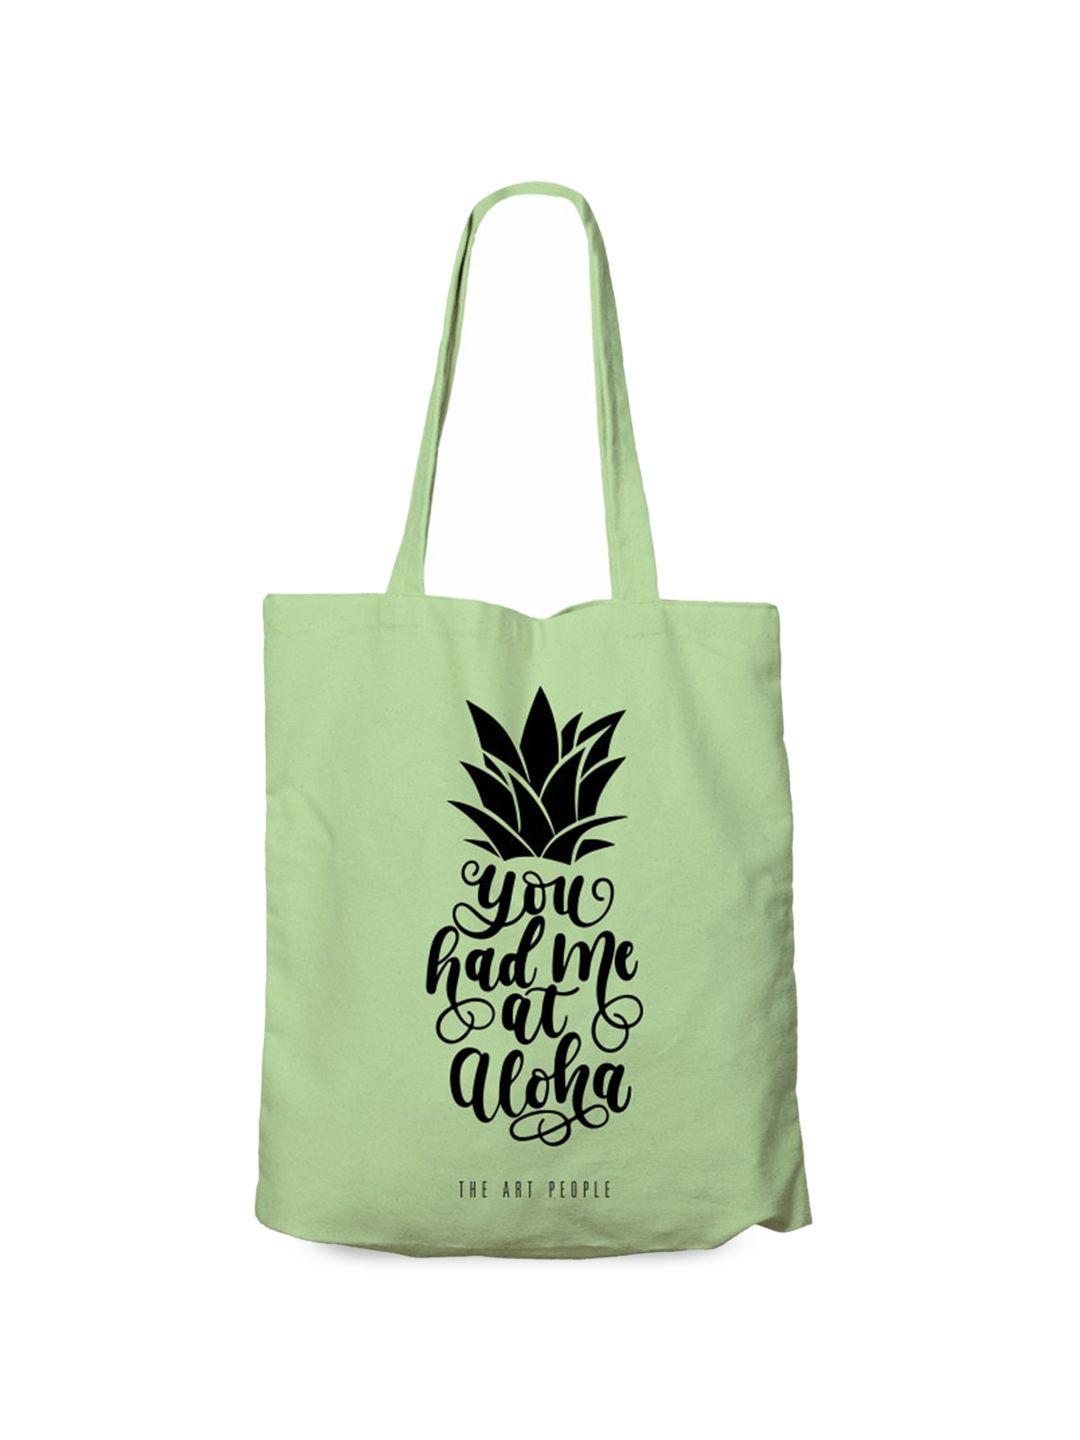 the art people printed shopper tote bag with applique